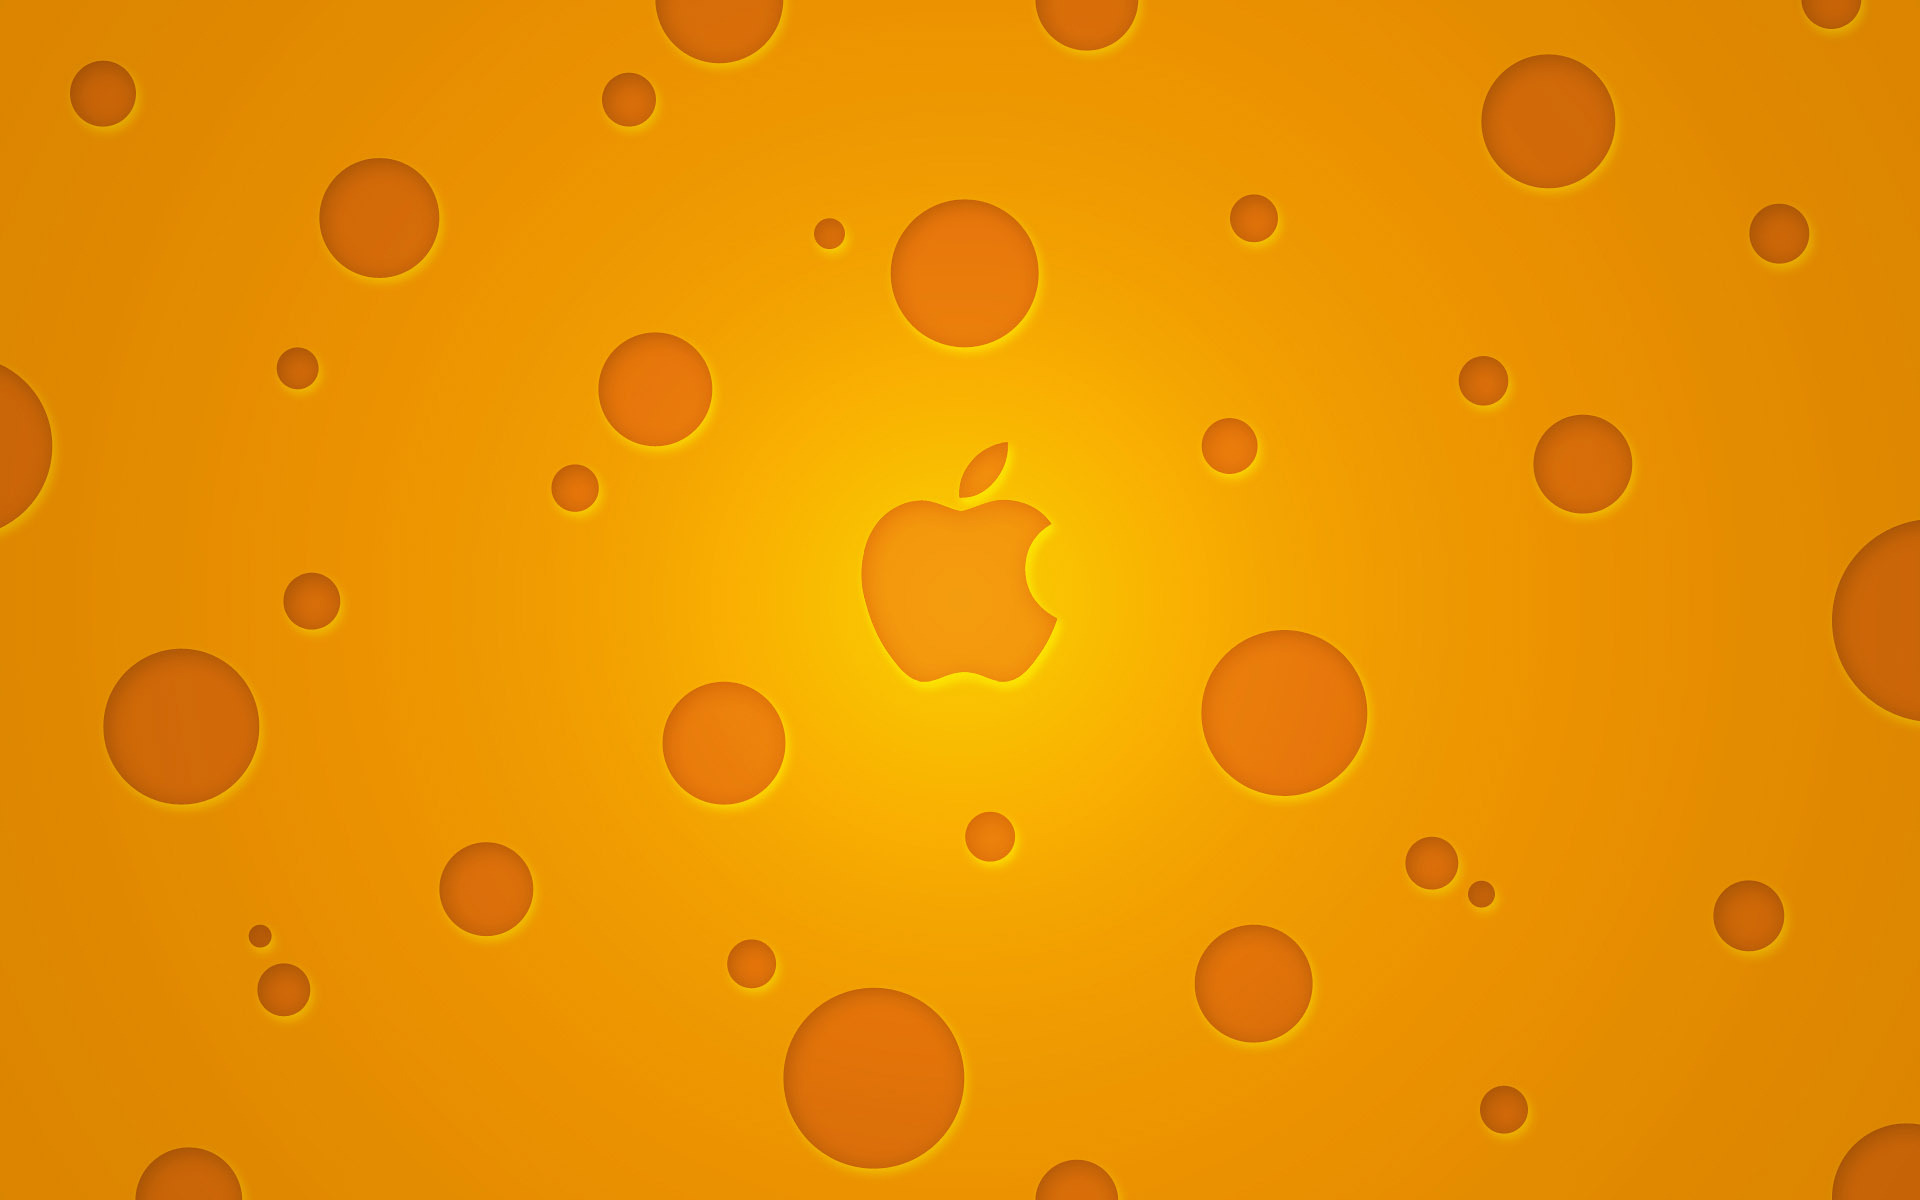 Bubbles pattern with apple backgrounds